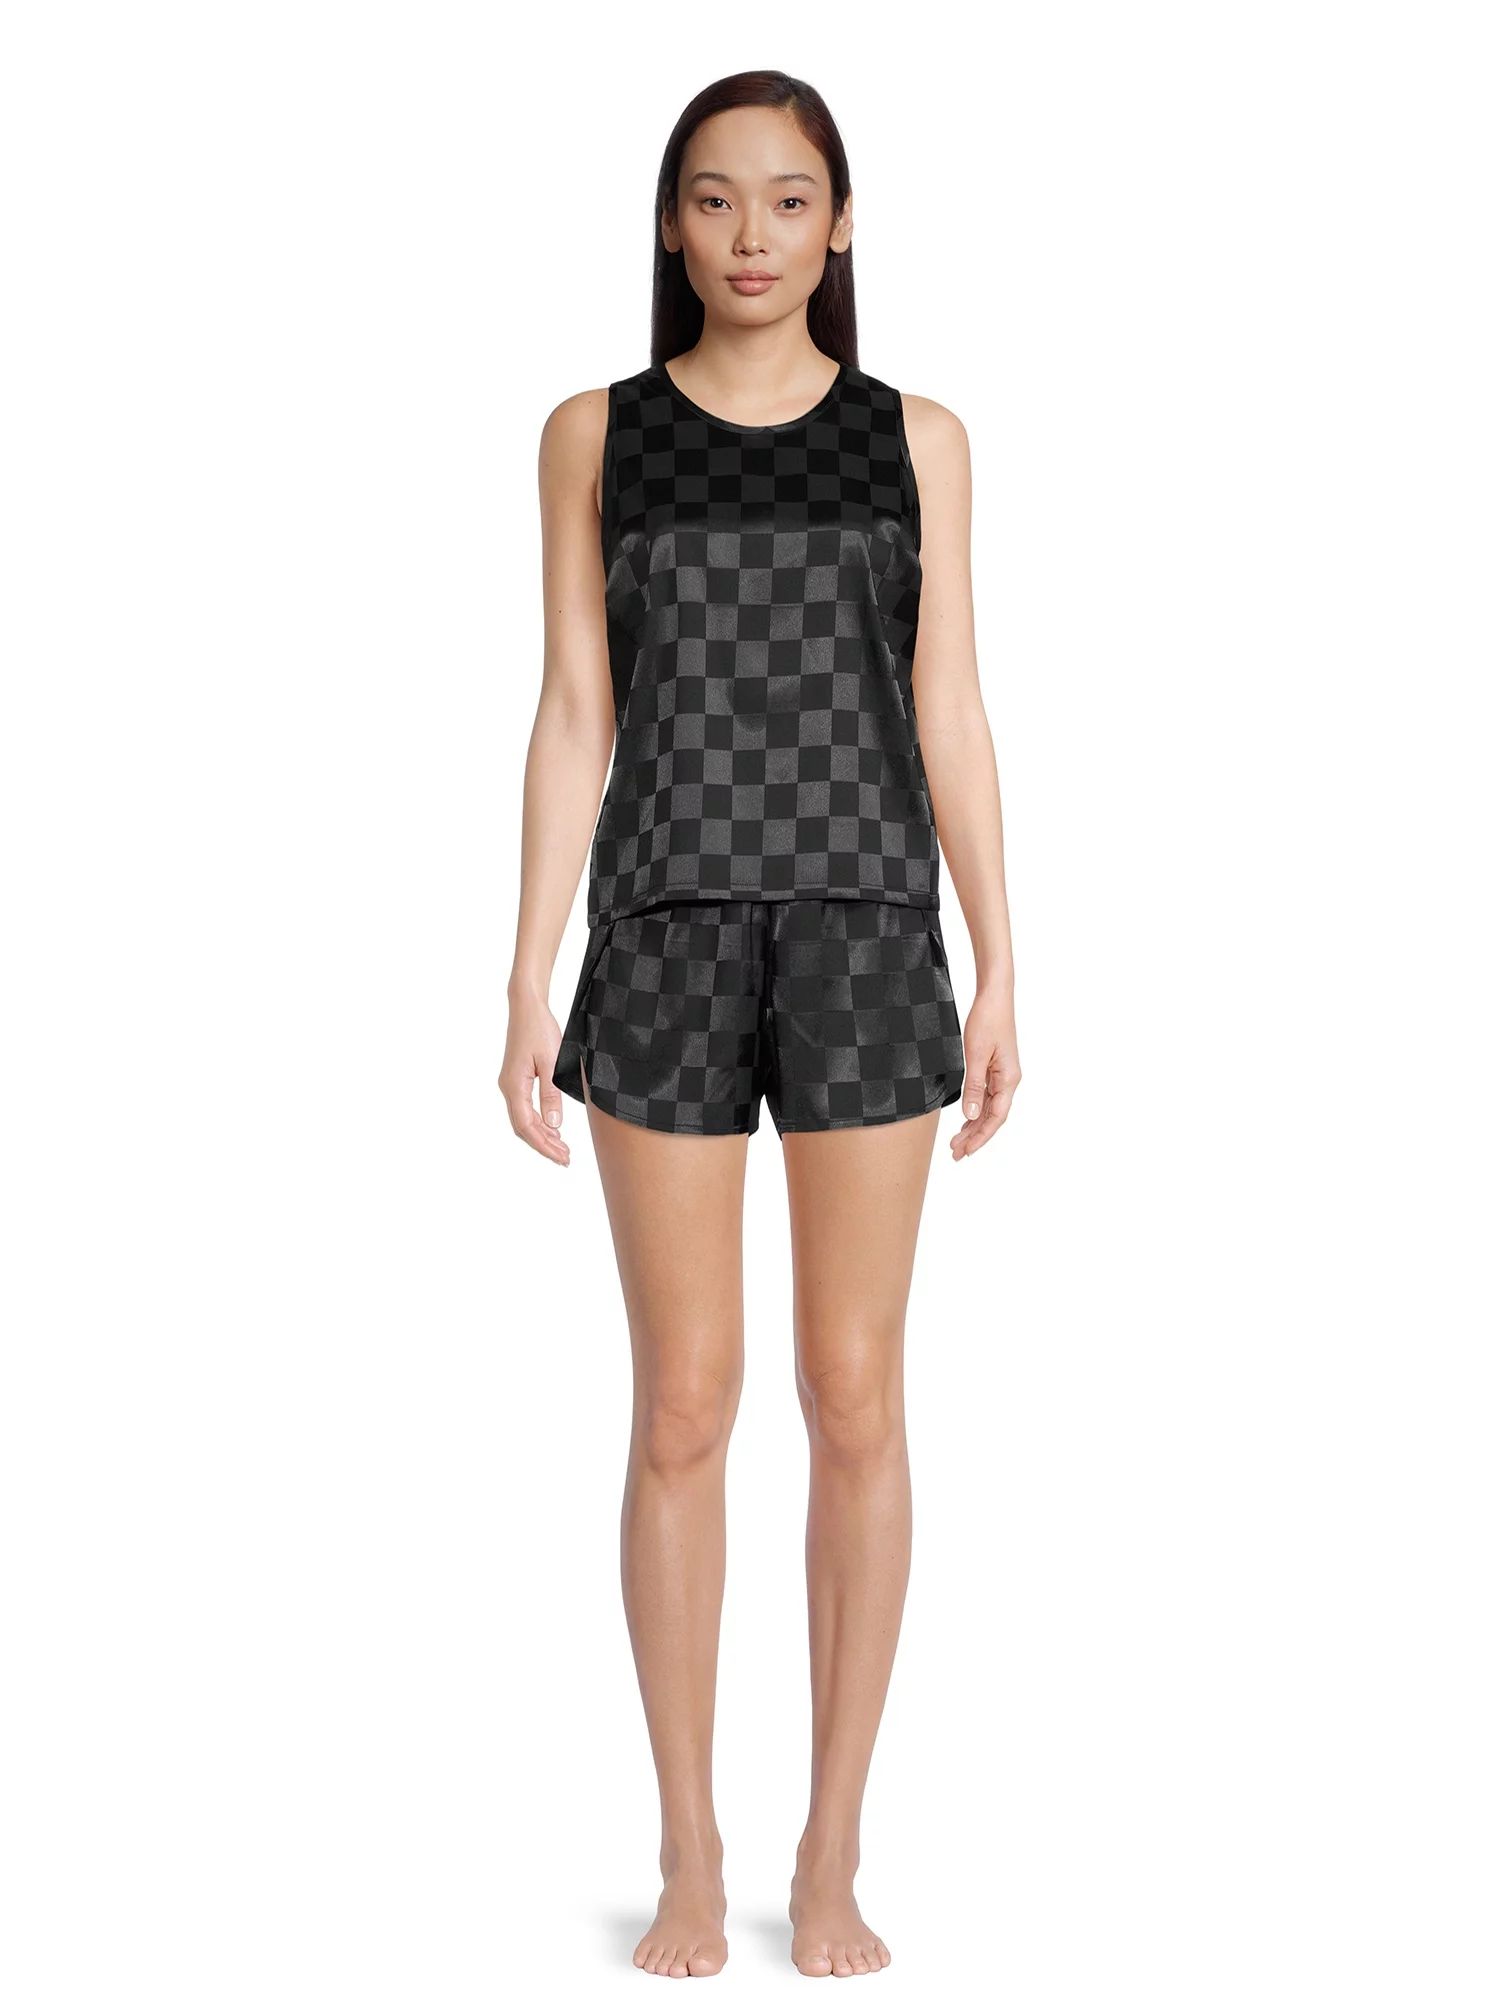 Lissome Women's and Women's Plus Satin Checkered Tank Top and Shorts Sleep Set, 2-Piece | Walmart (US)